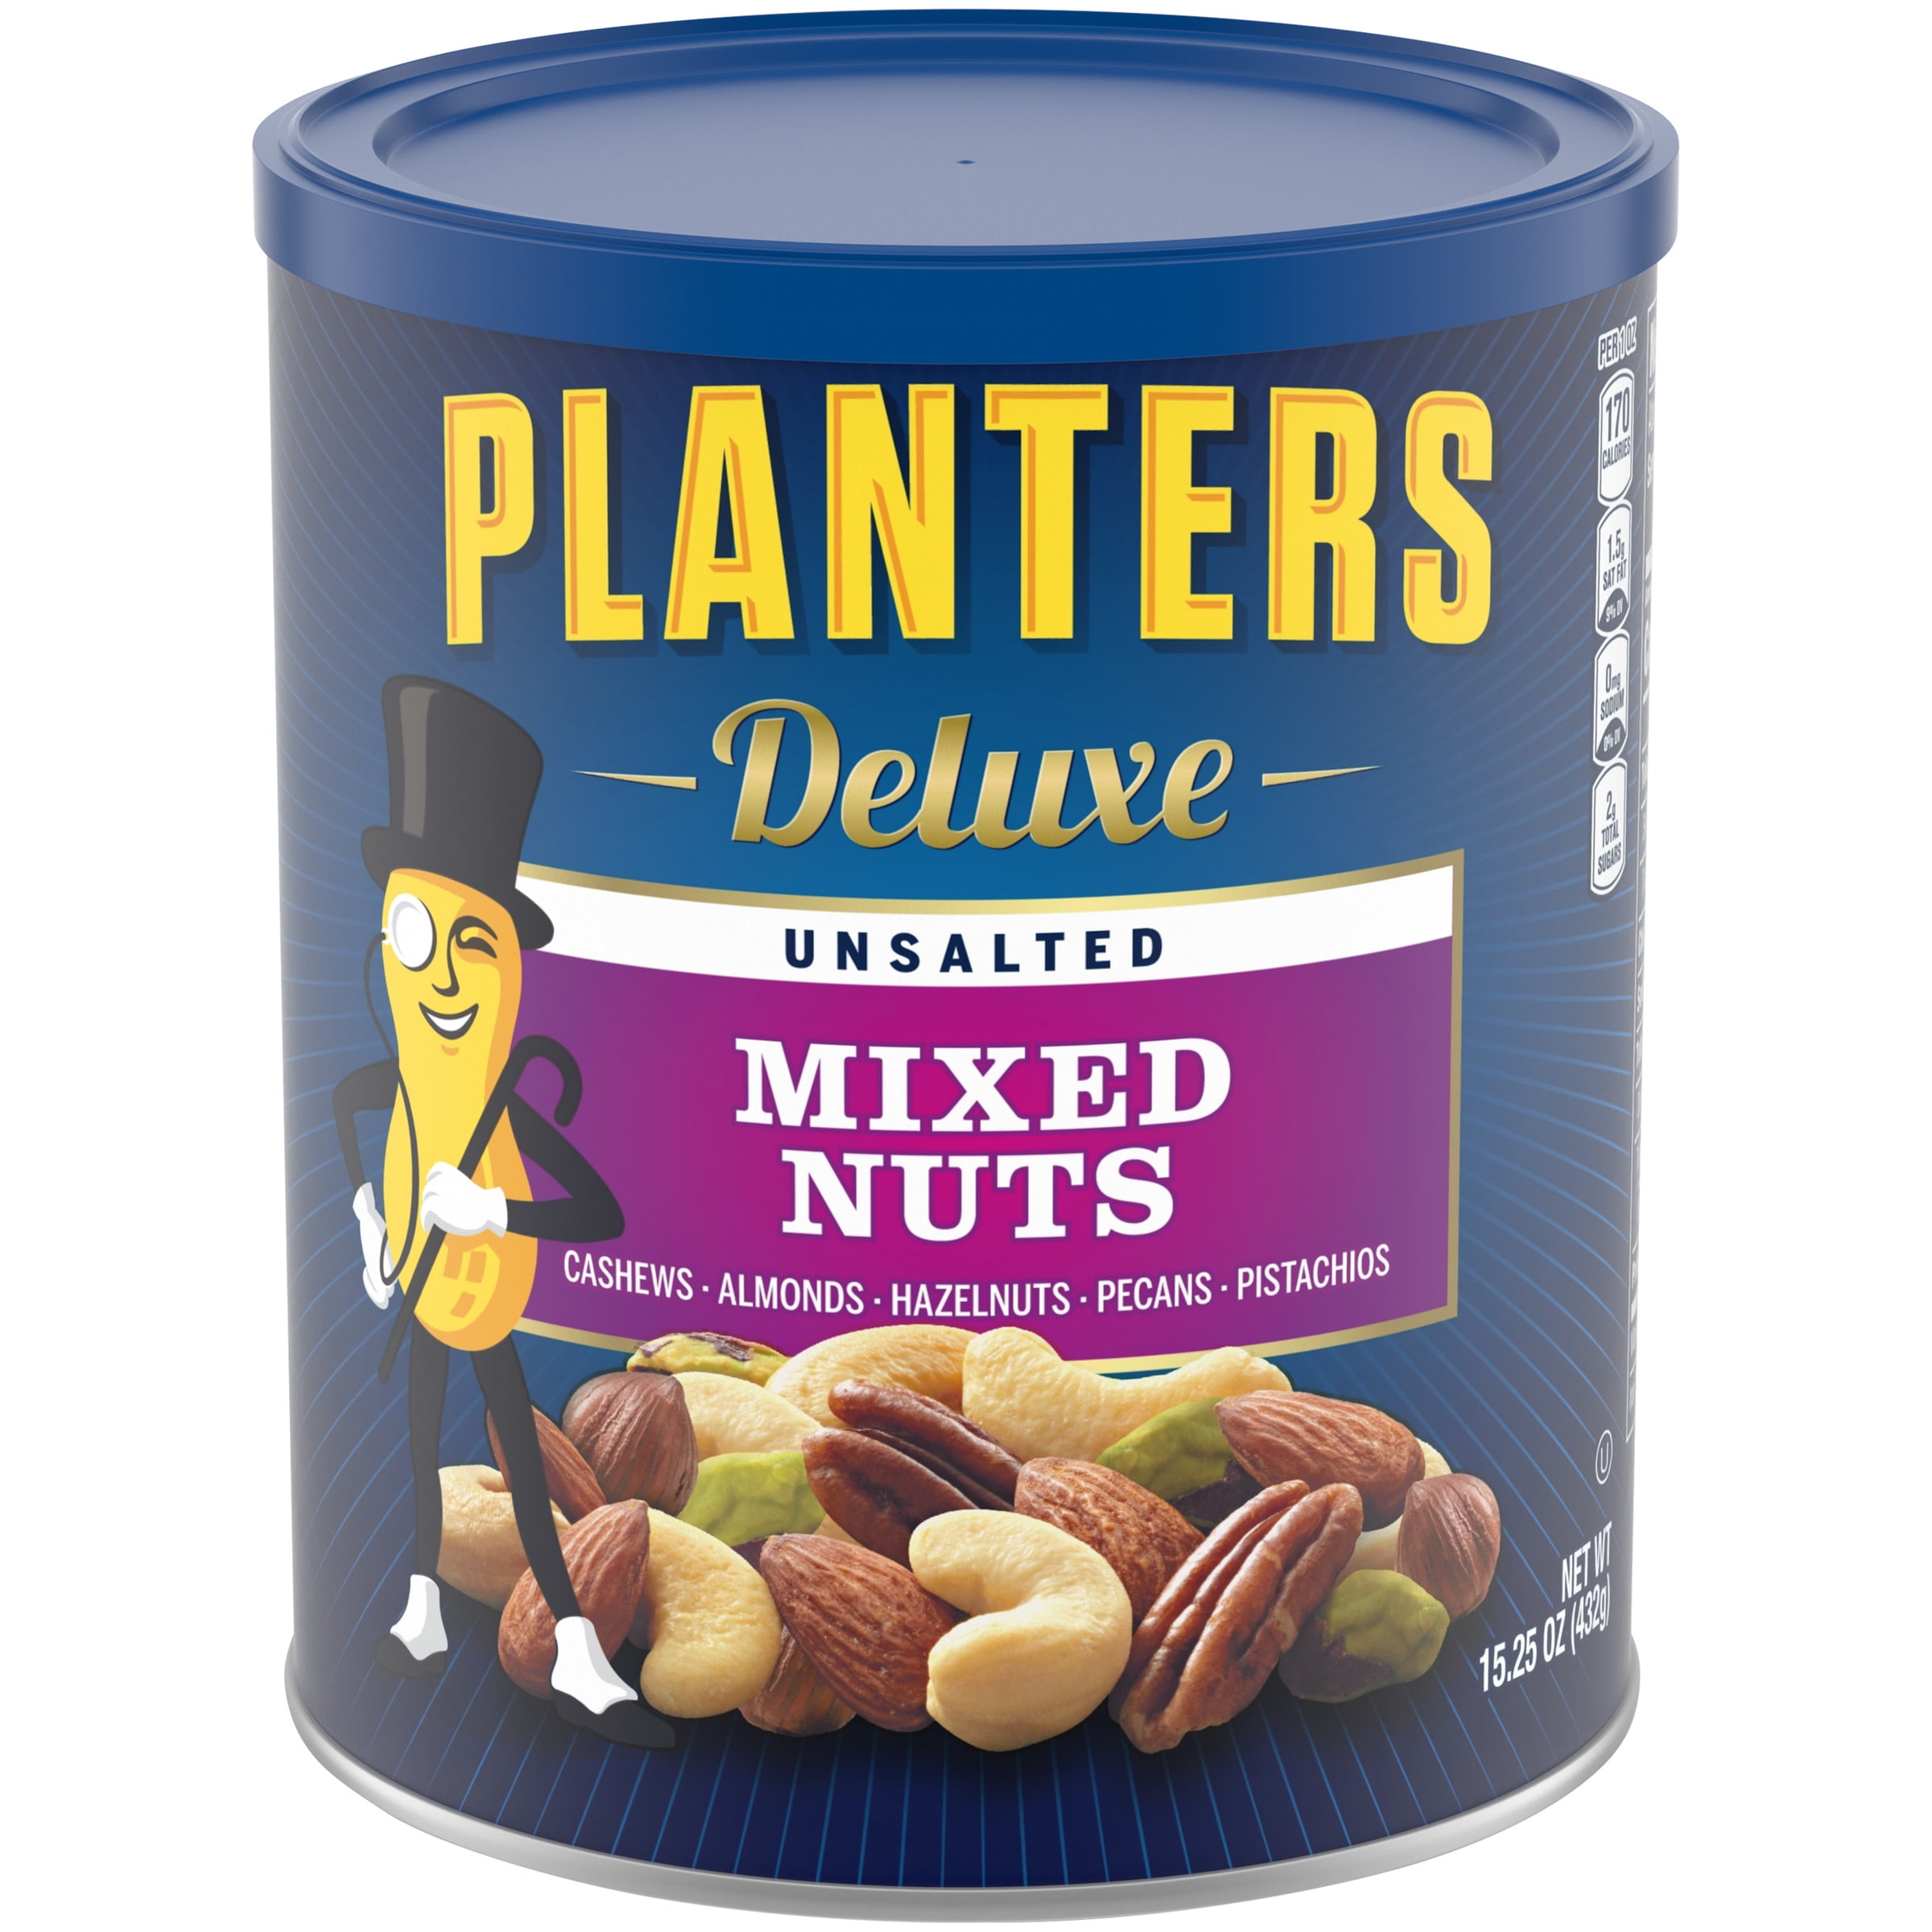 Planters Deluxe Unsalted Mixed Nuts with Almonds, Hazelnuts, Pecans & Pistachios, oz Canister - Walmart.com